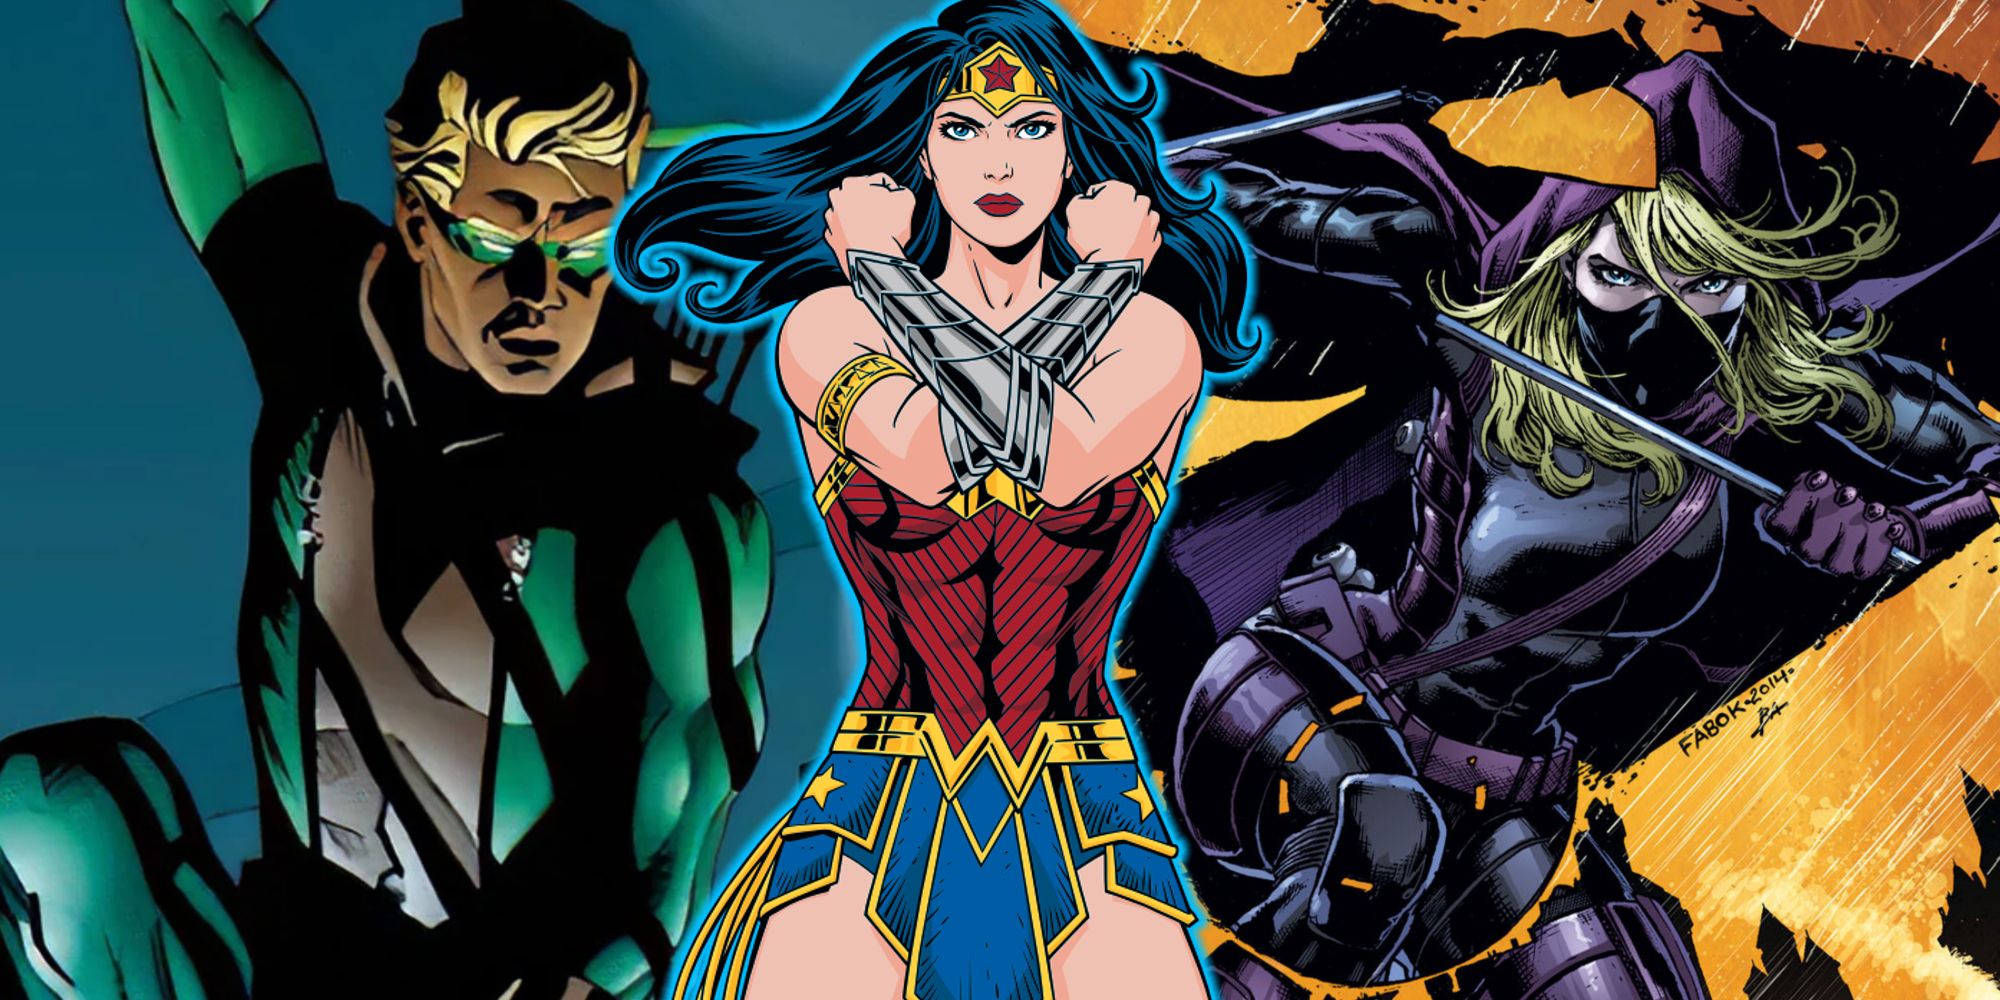 Split image of Connor Hawke, Wonder Woman, and Stephanie Brown in DC Comics